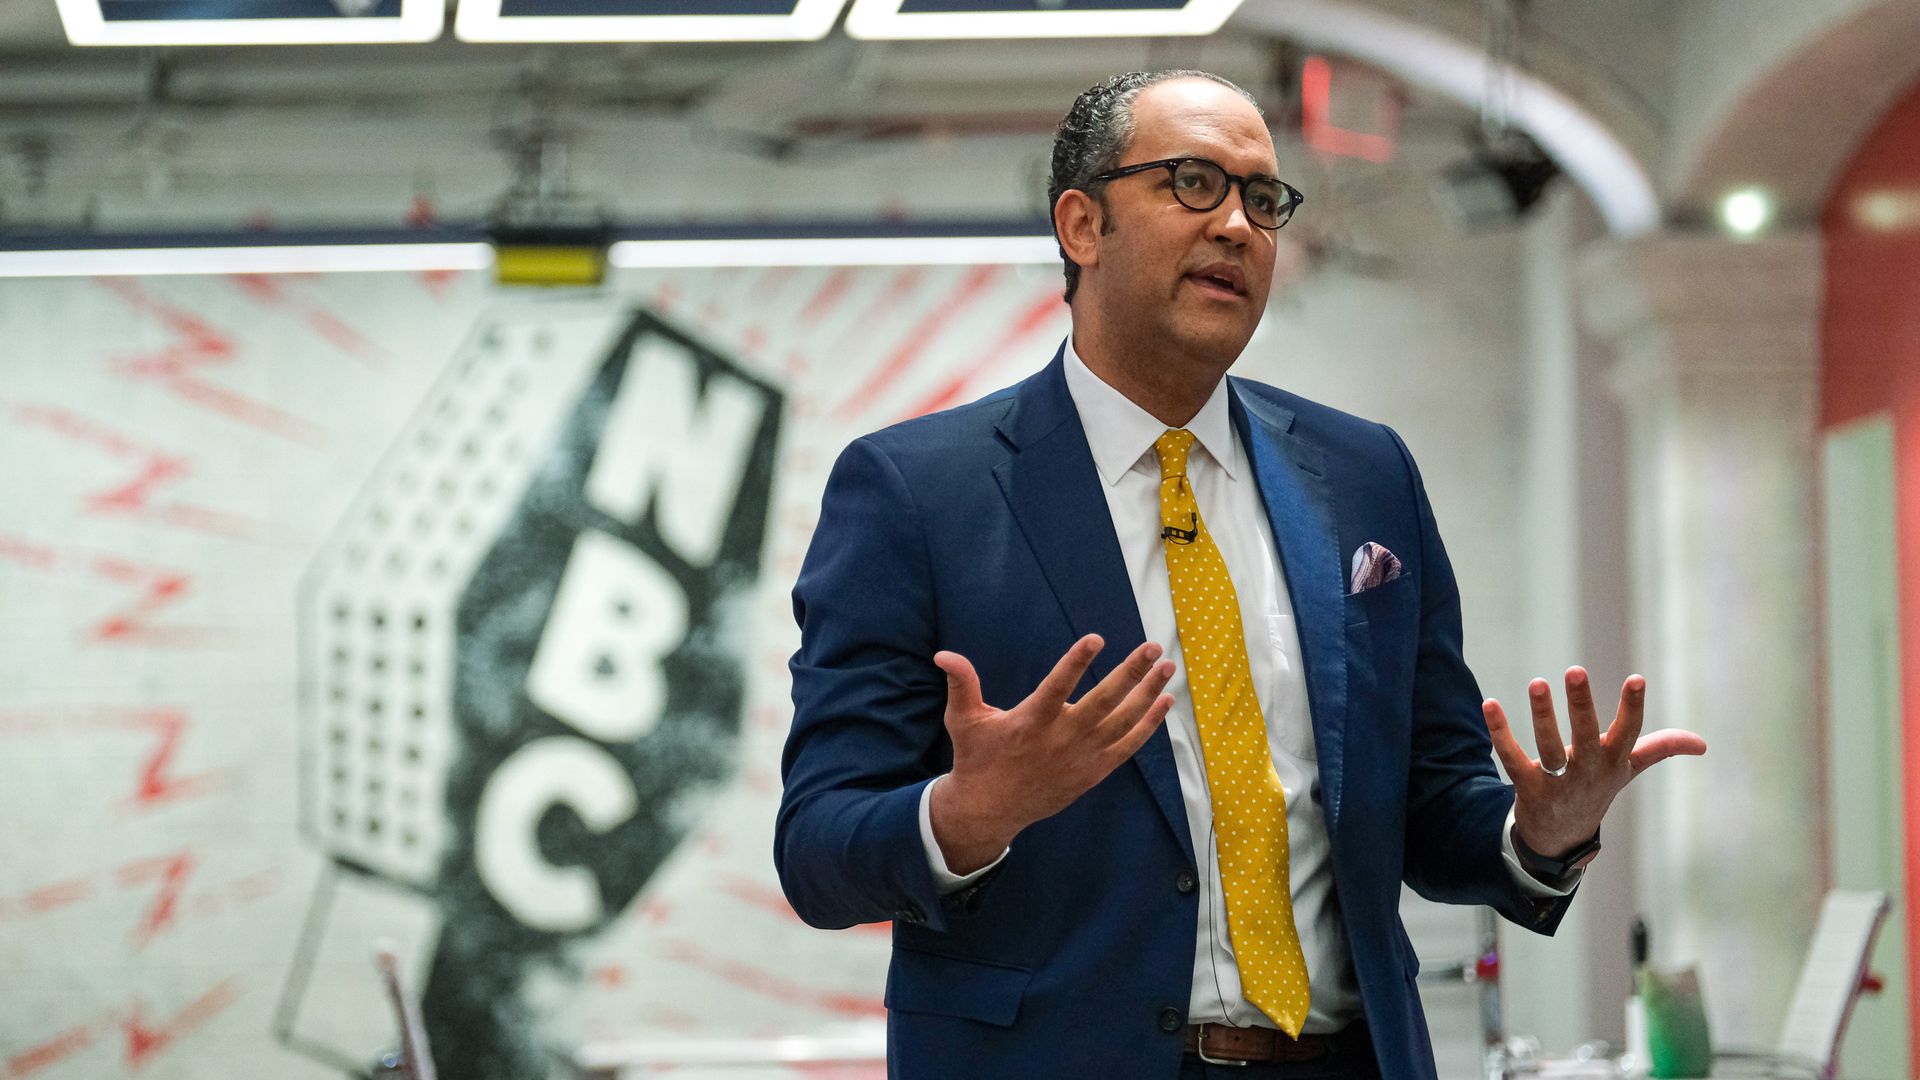 Former Rep. Will Hurd (R-TX) appears on "Meet the Press" in Washington, D.C. Sunday, May 14, 2023.